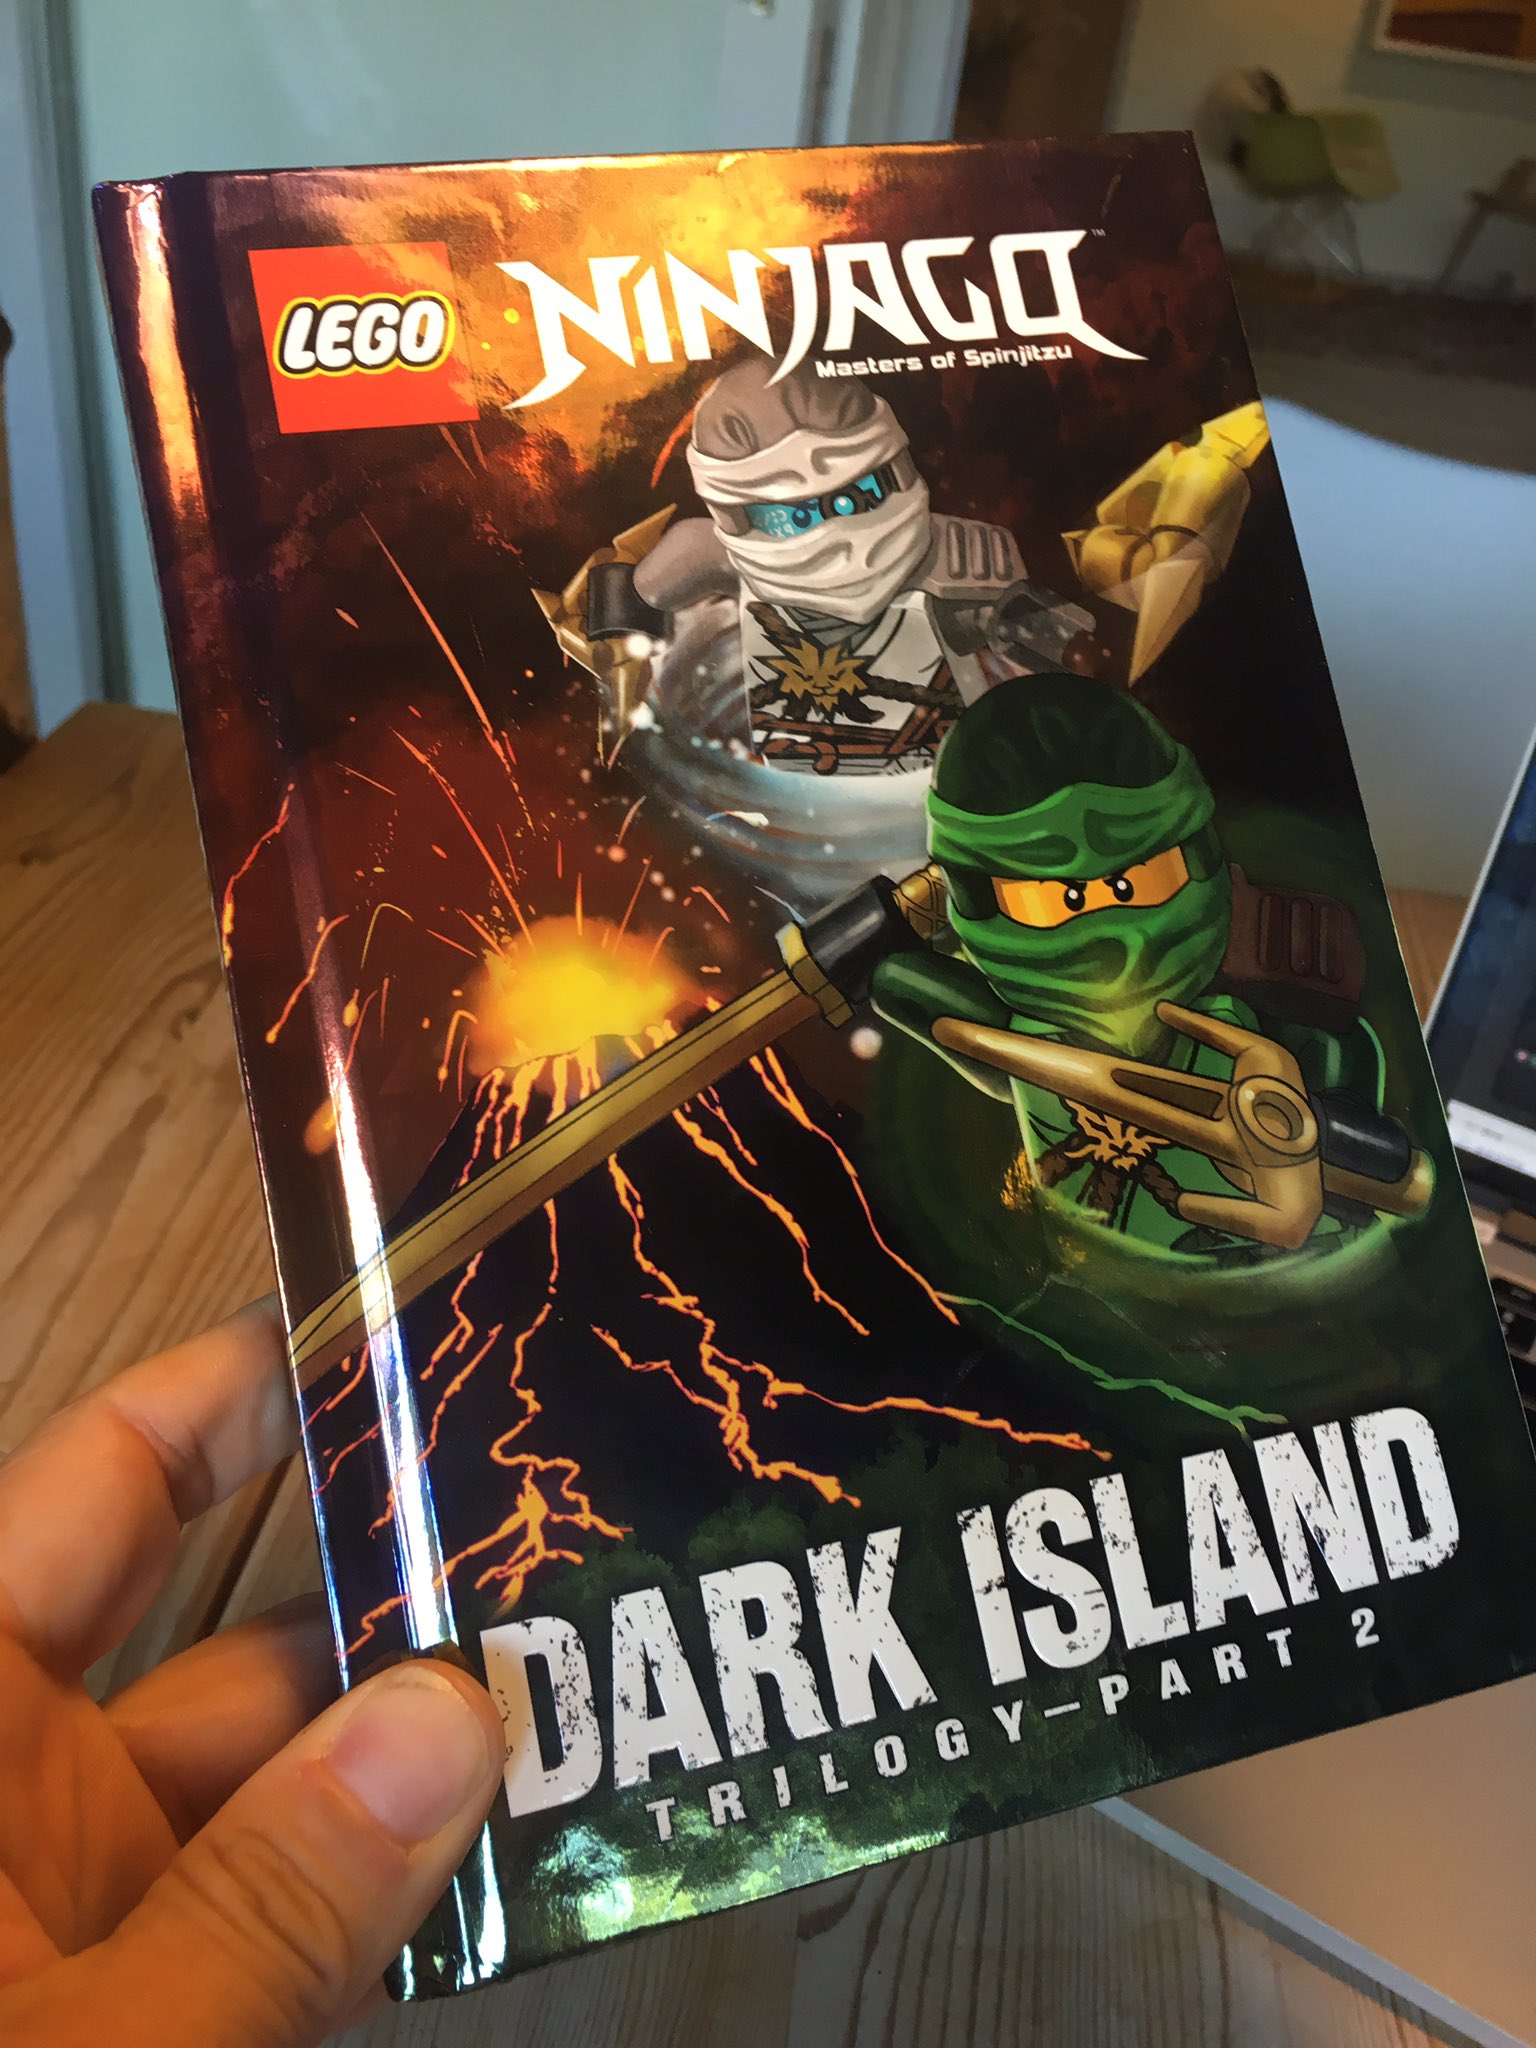 Twitter 上的Not here!："Look my partner in crime Tommy K. just me! So glad how our stories in canon Ninjago books turn out! https://t.co/LNoEWKjsl4" / Twitter